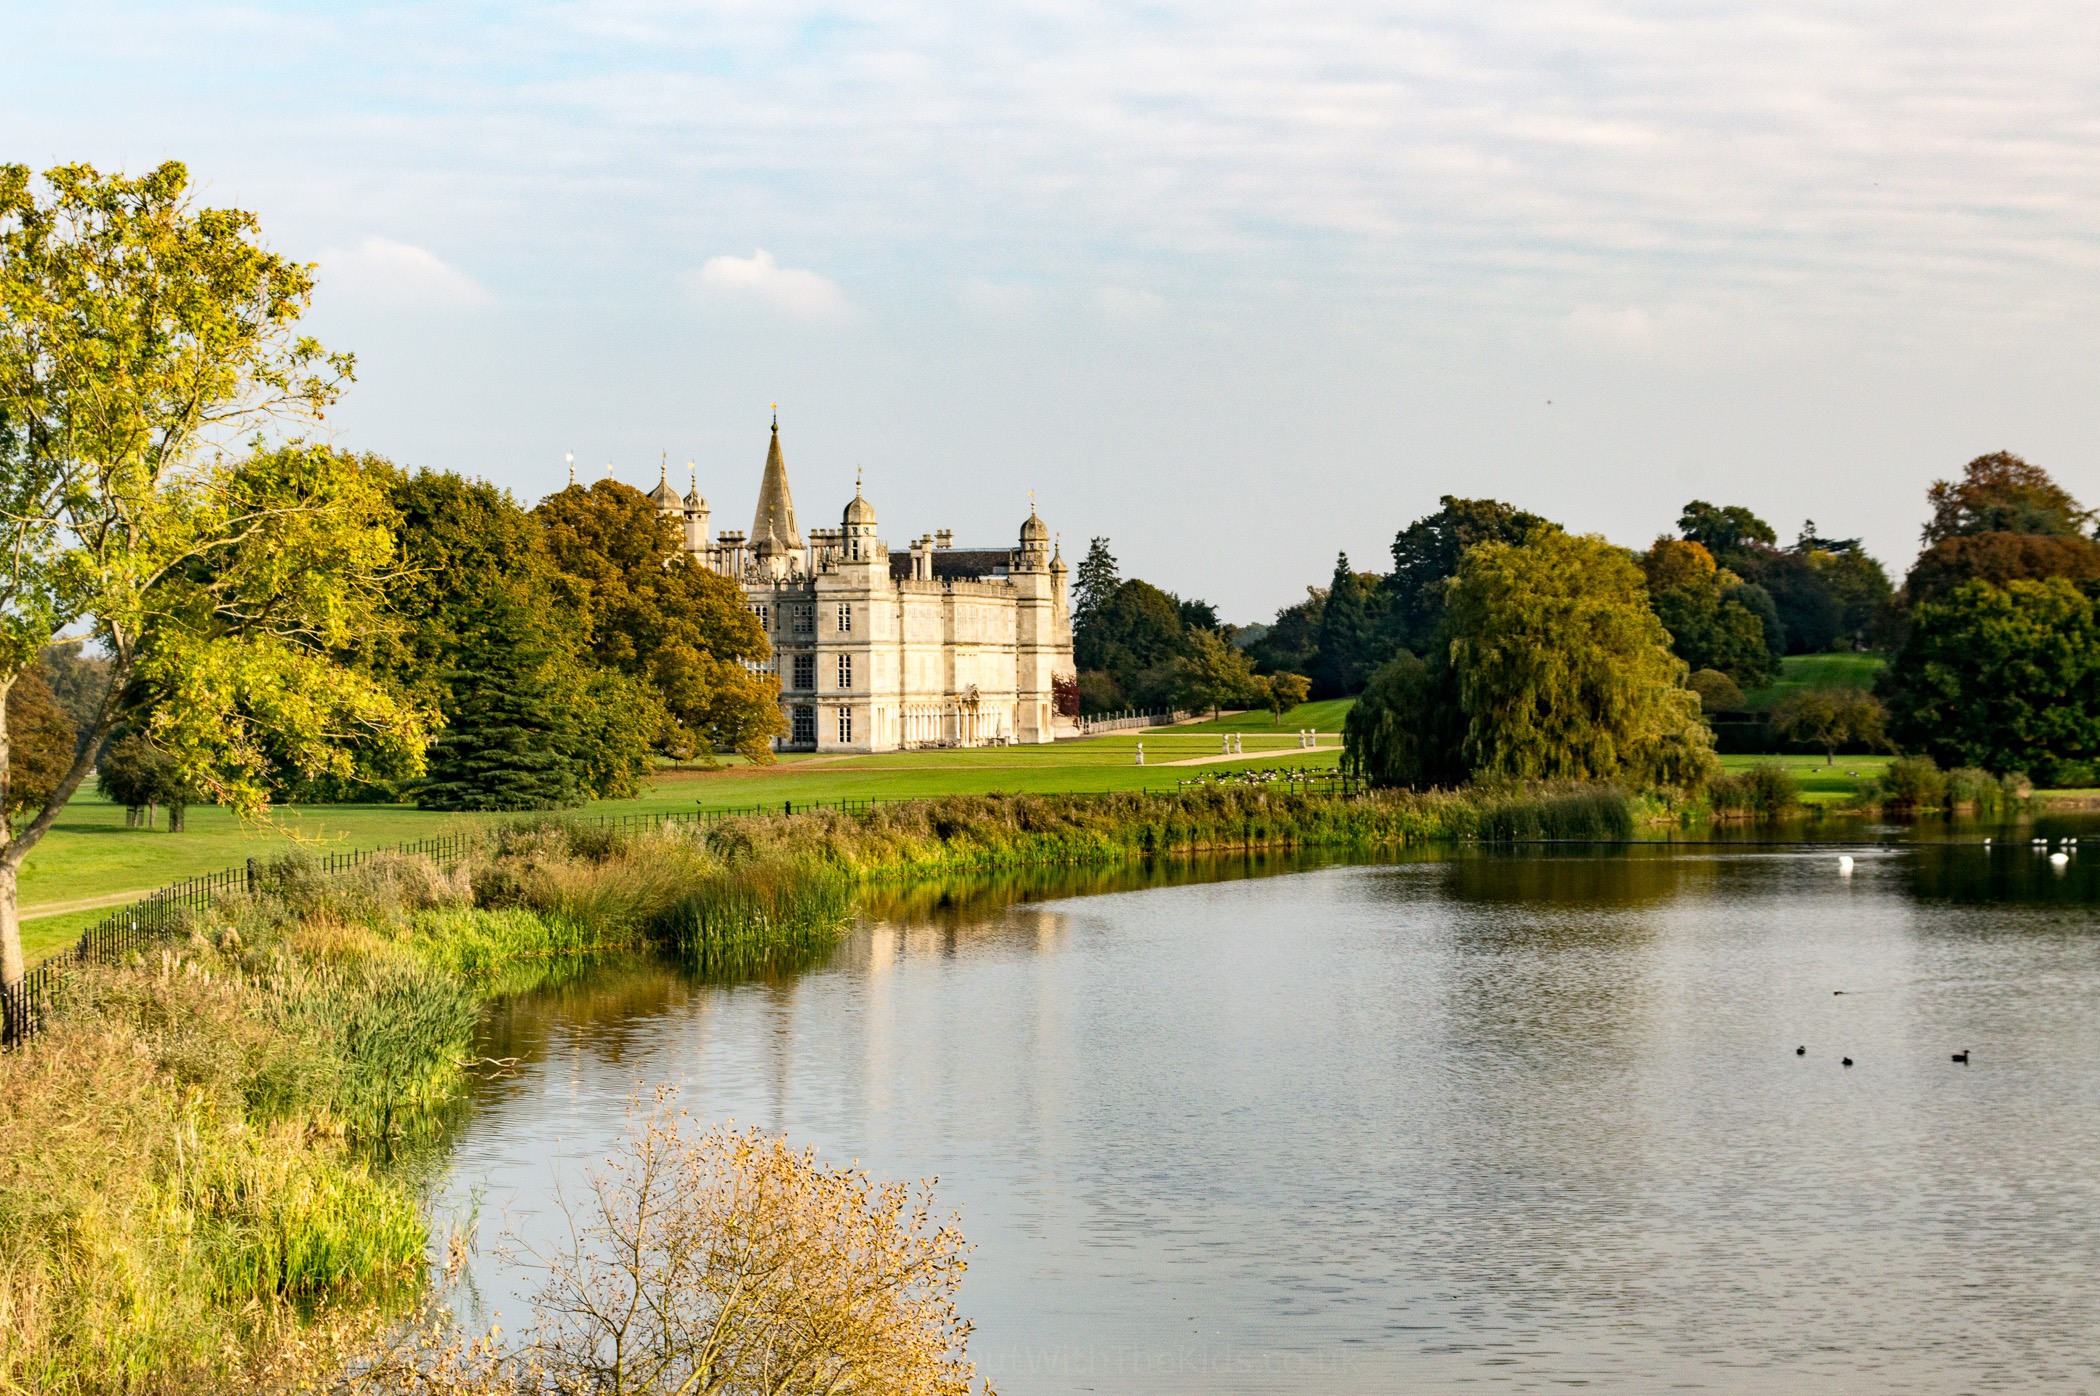 Burghley House next to the lake